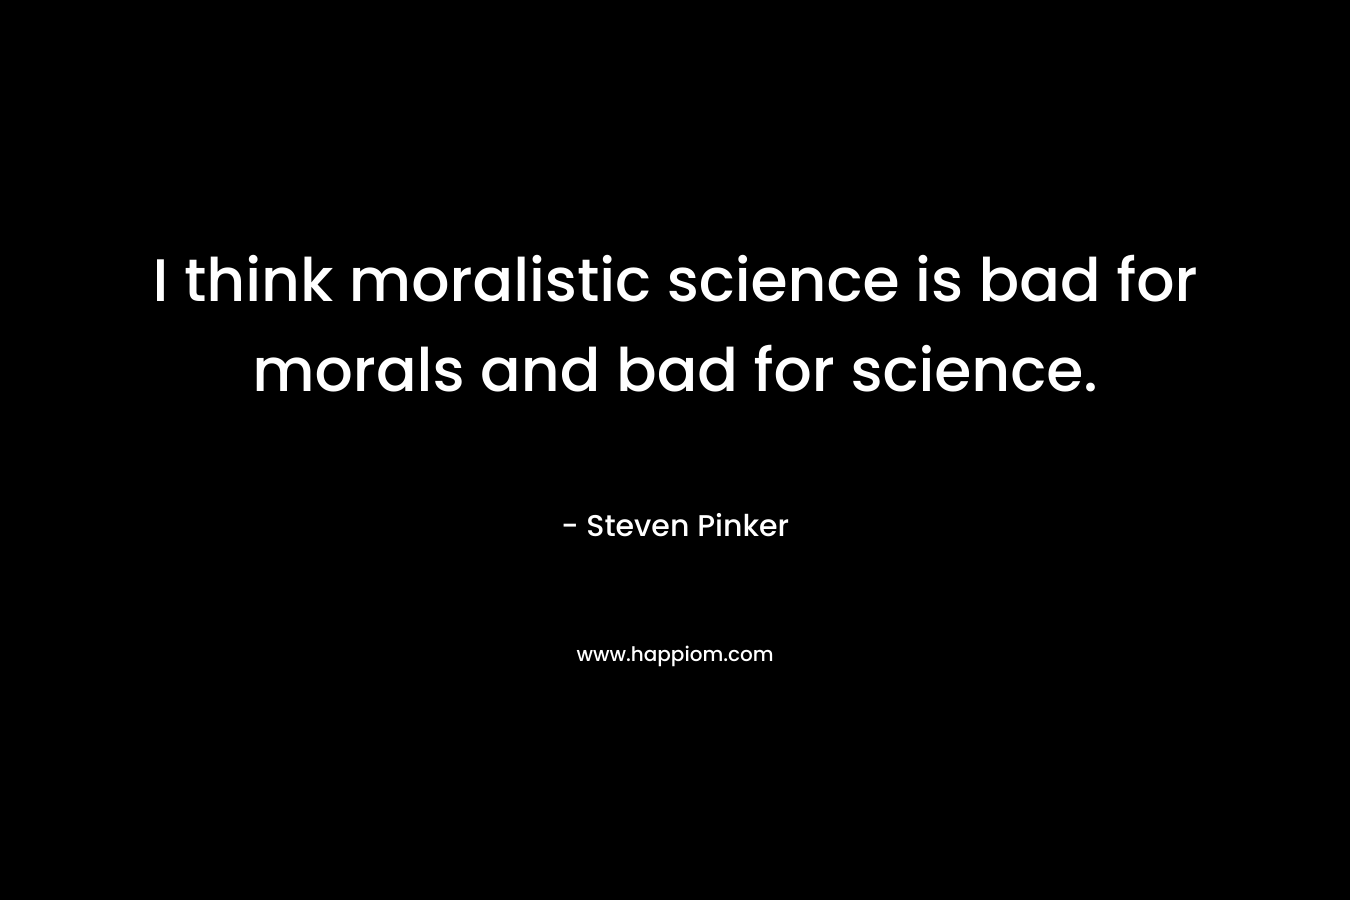 I think moralistic science is bad for morals and bad for science.